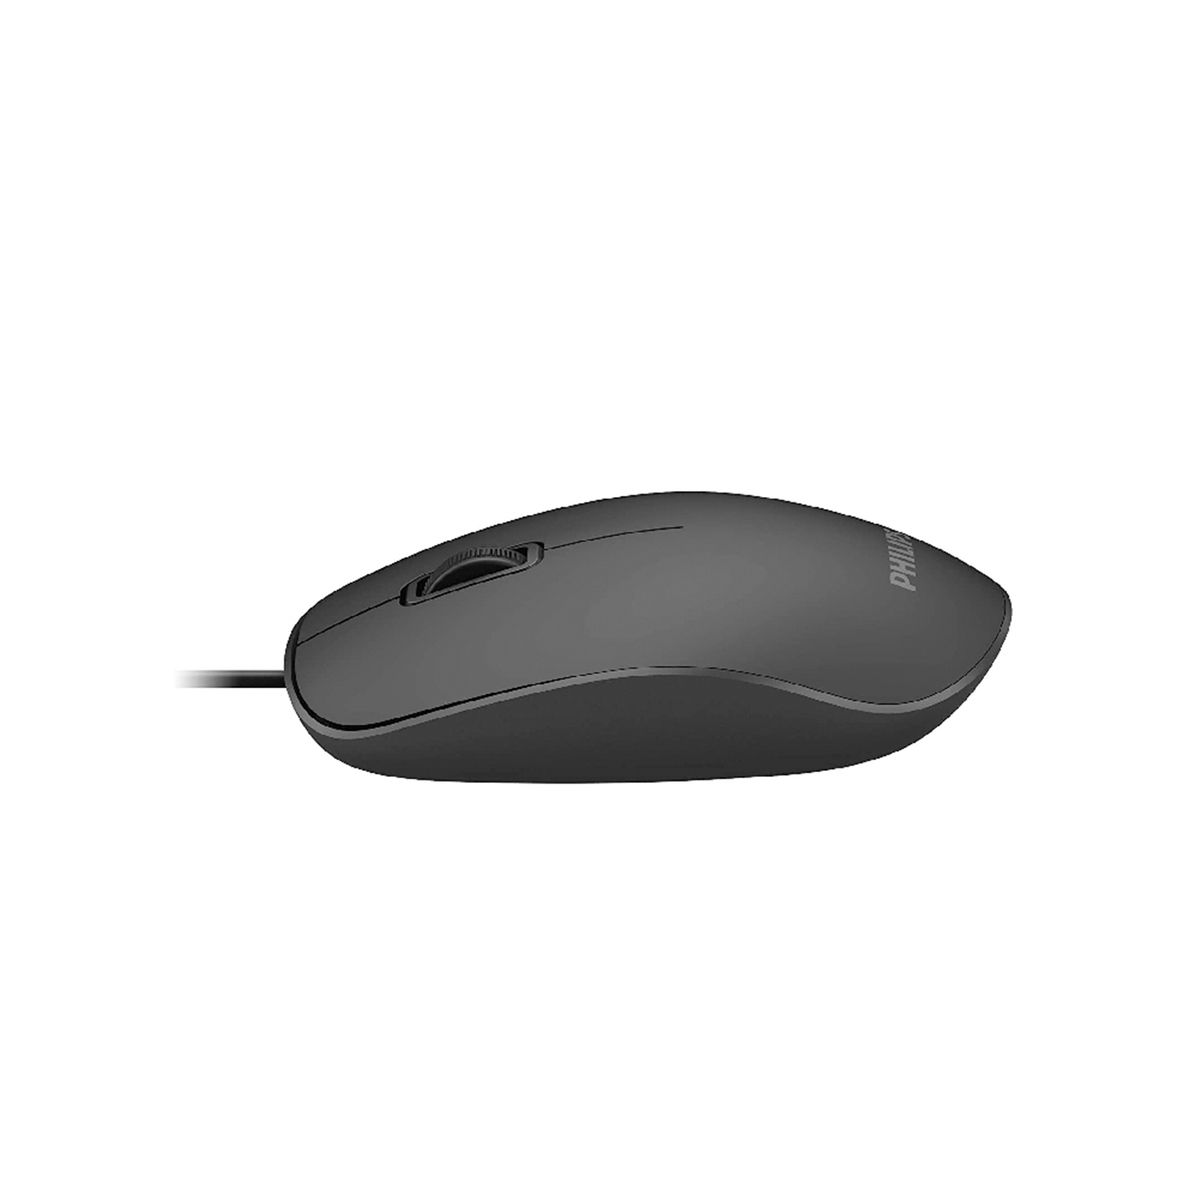 Philips 2.4GHz Wired Mouse 1600DPI SPK7334